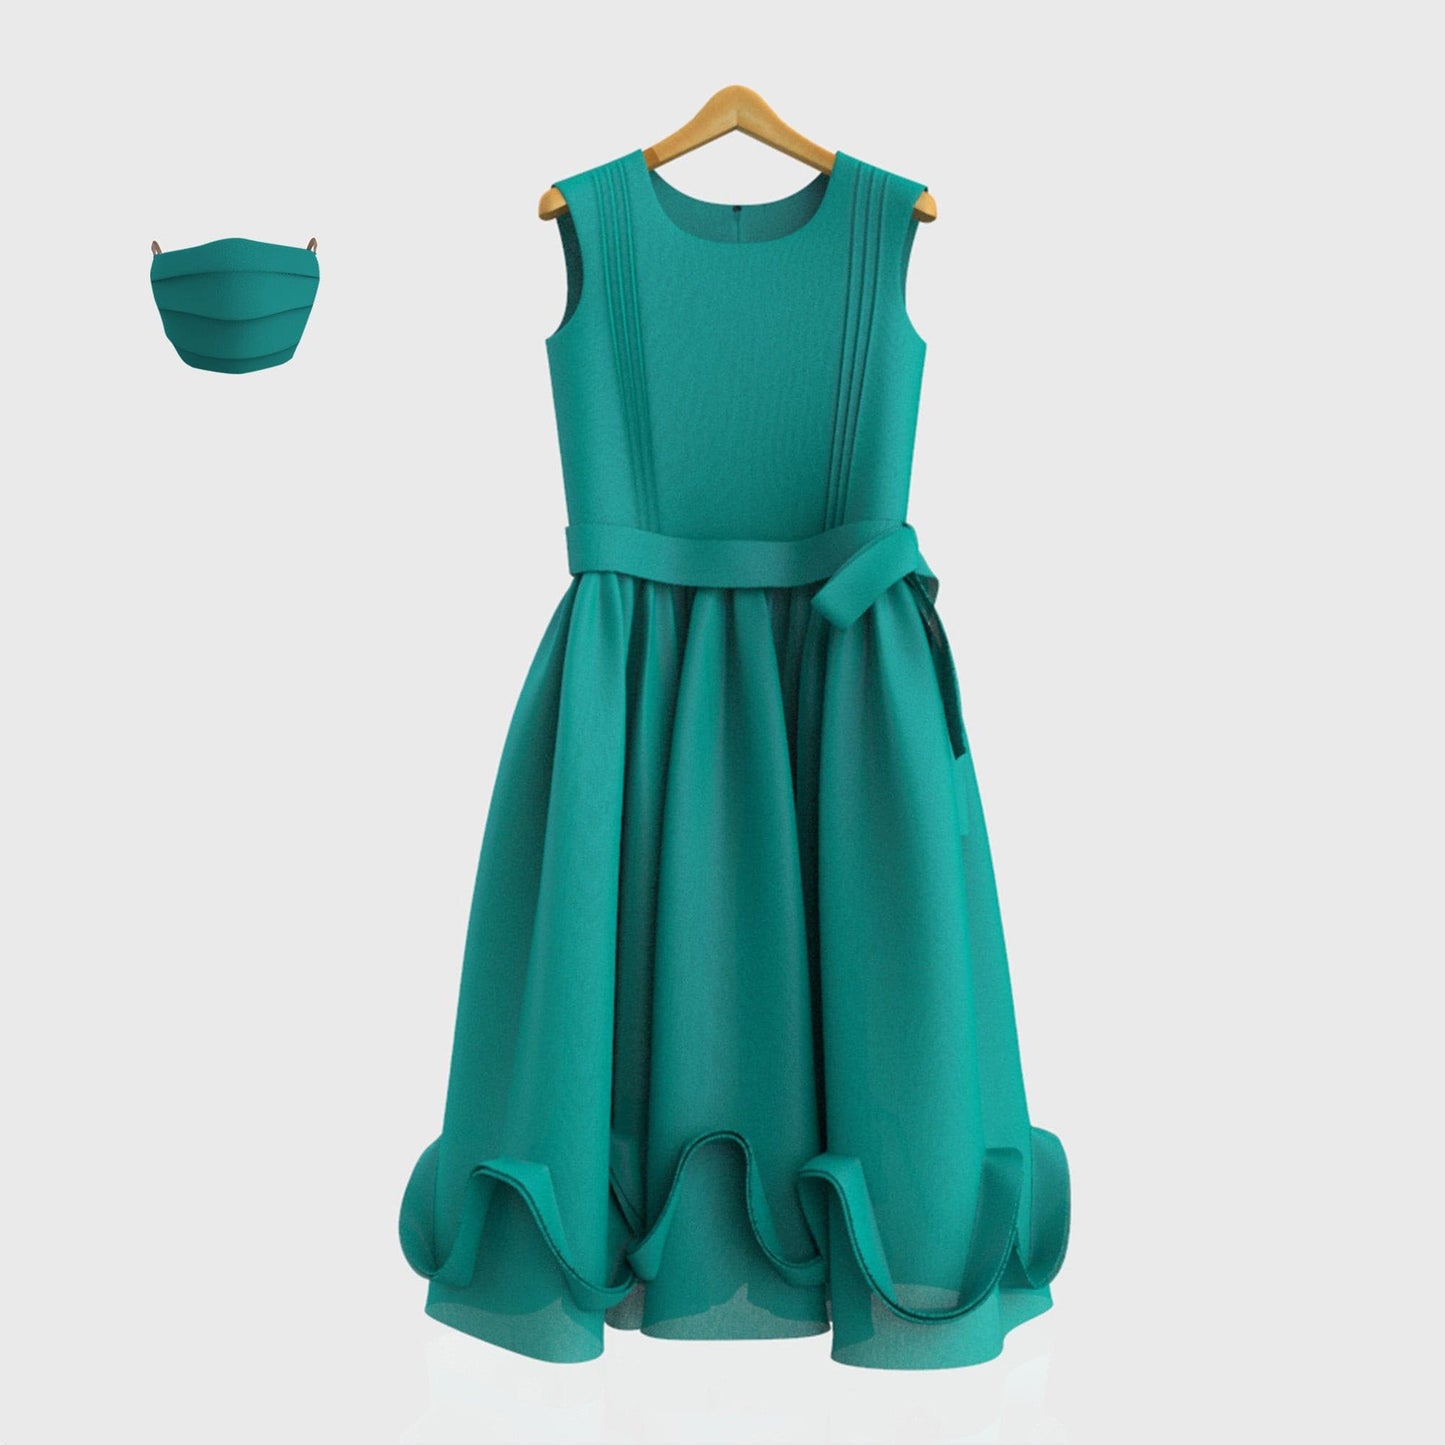 HEYKIDOO latest designer kids girls teens stylish comfortable Knee length birthday Party wear dress most beautiful party frocks occasional elegant zig zag green Solid  frocks online shopping fashionable elegant dress party 7 years stylish unique good quality trendy for gift purpose kids